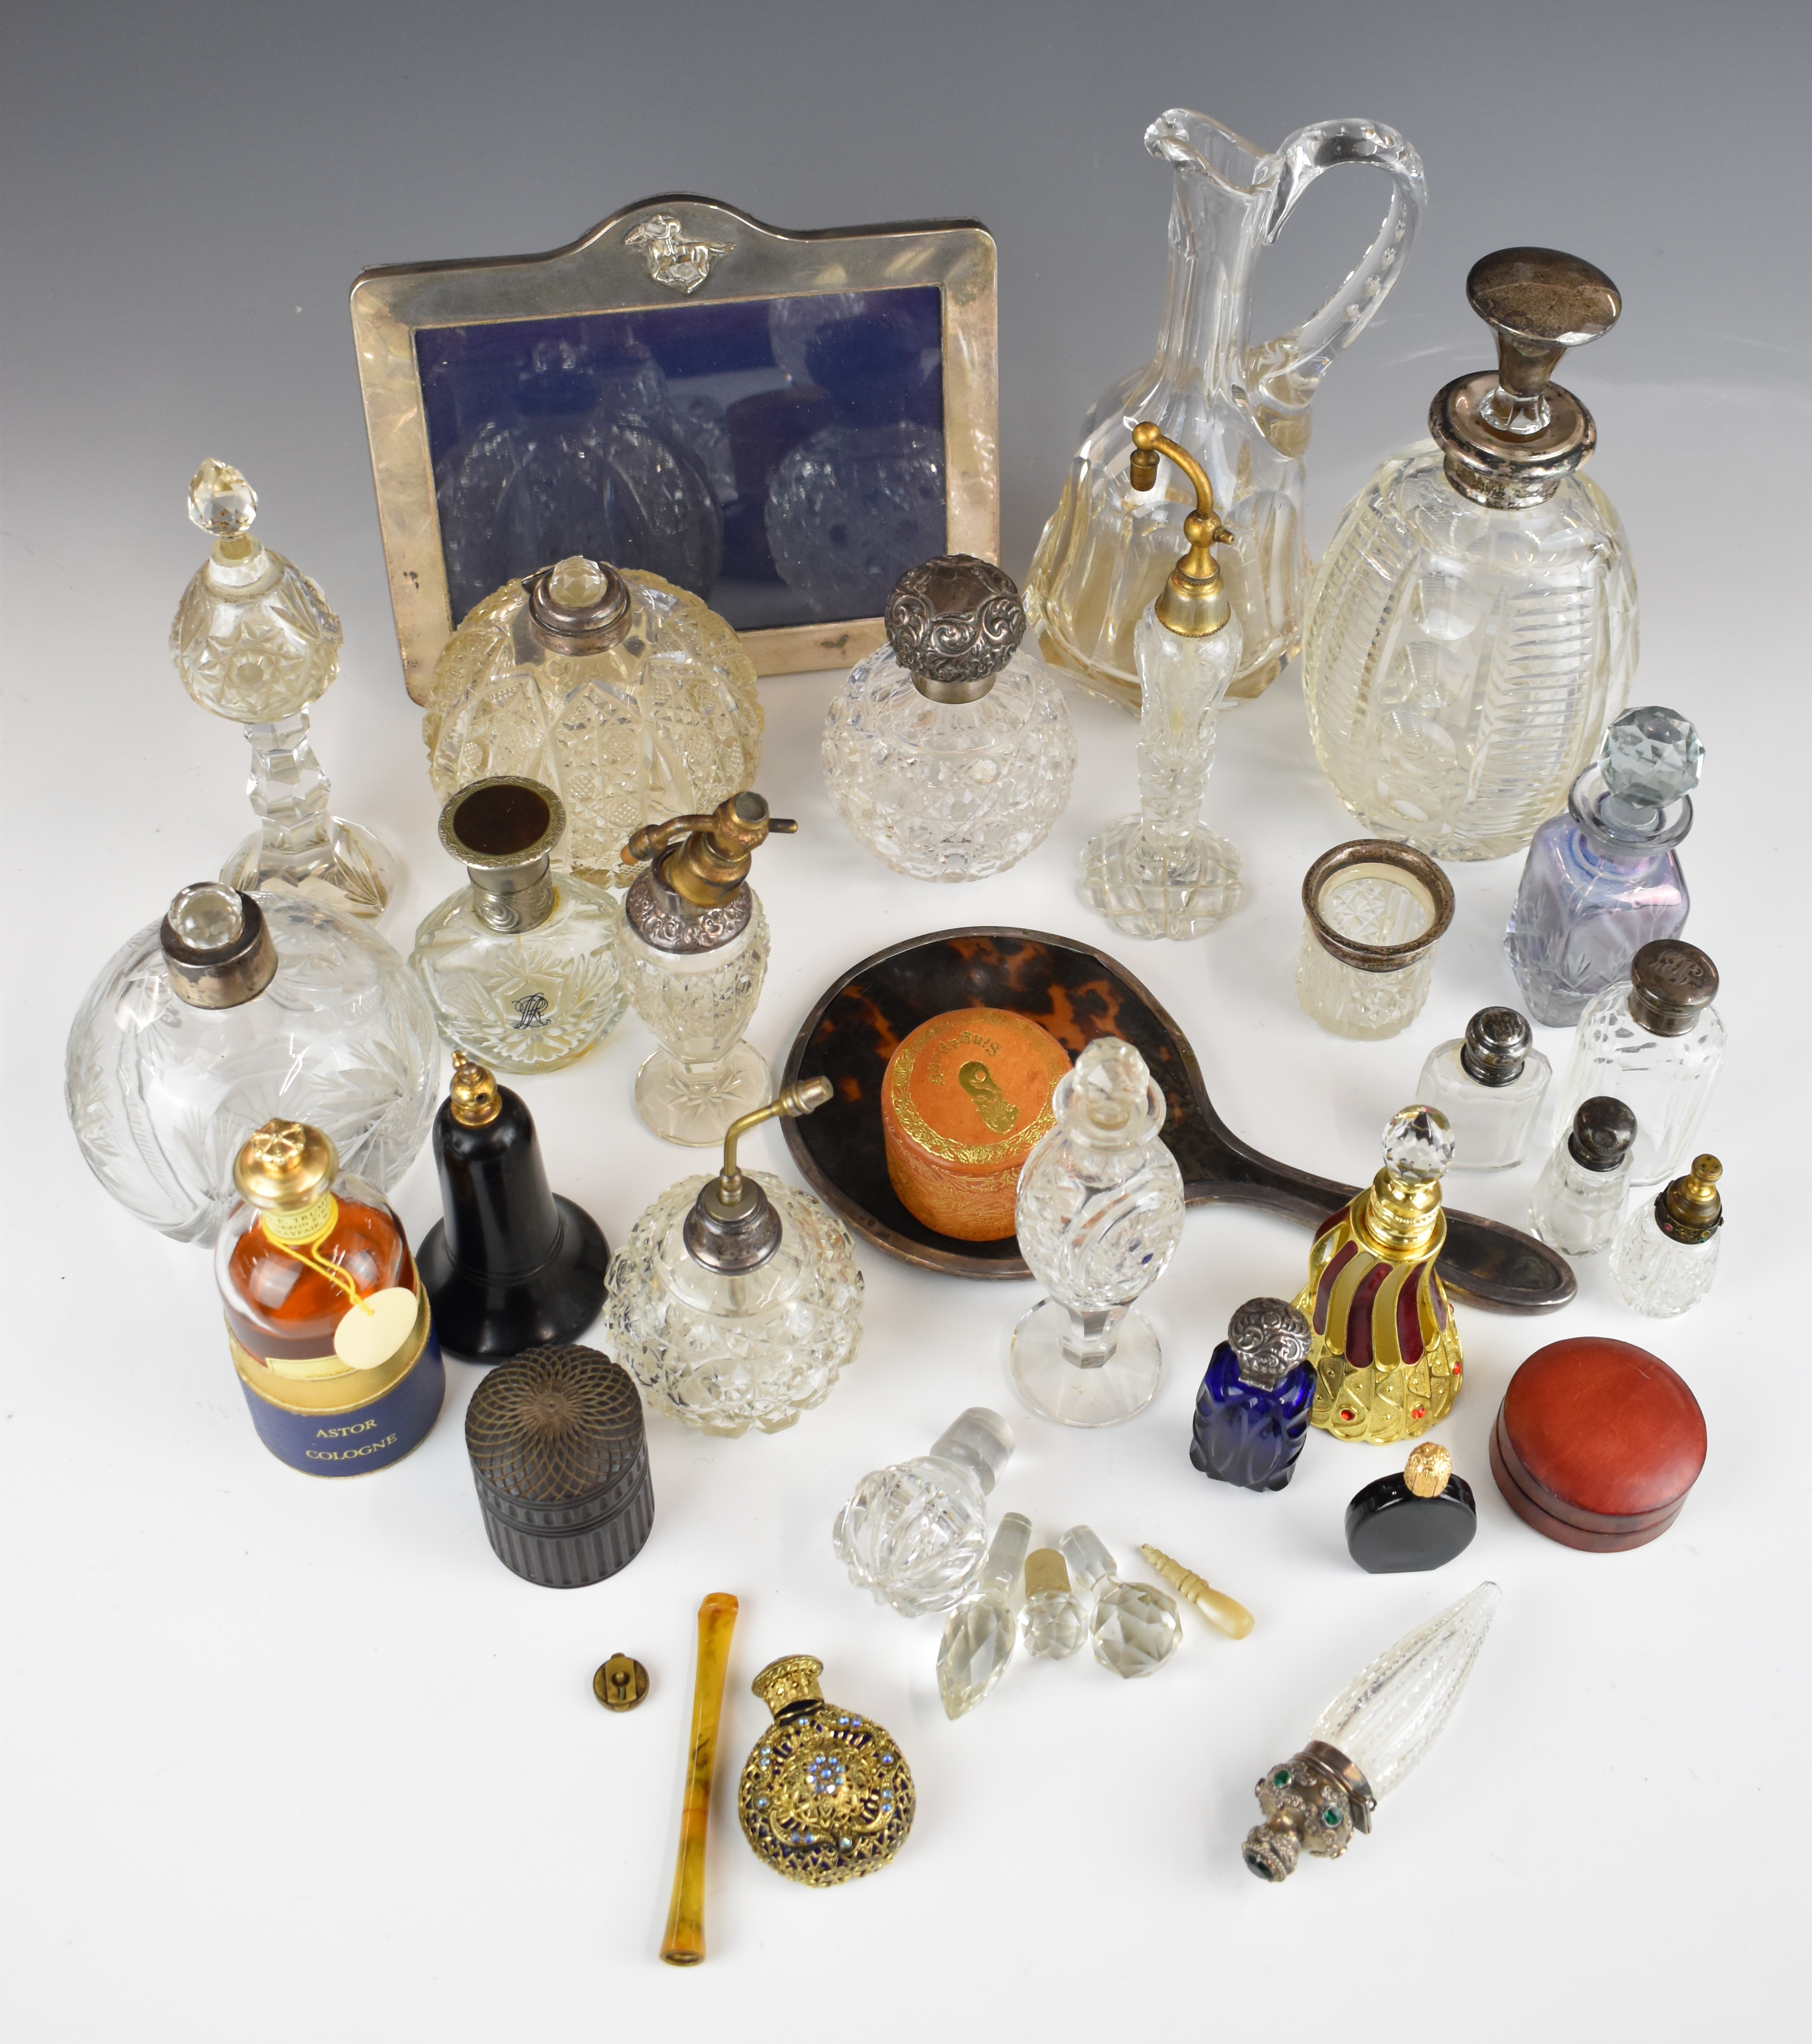 Hallmarked silver mounted glass items including claret jug, decanter, scent bottles etc, further